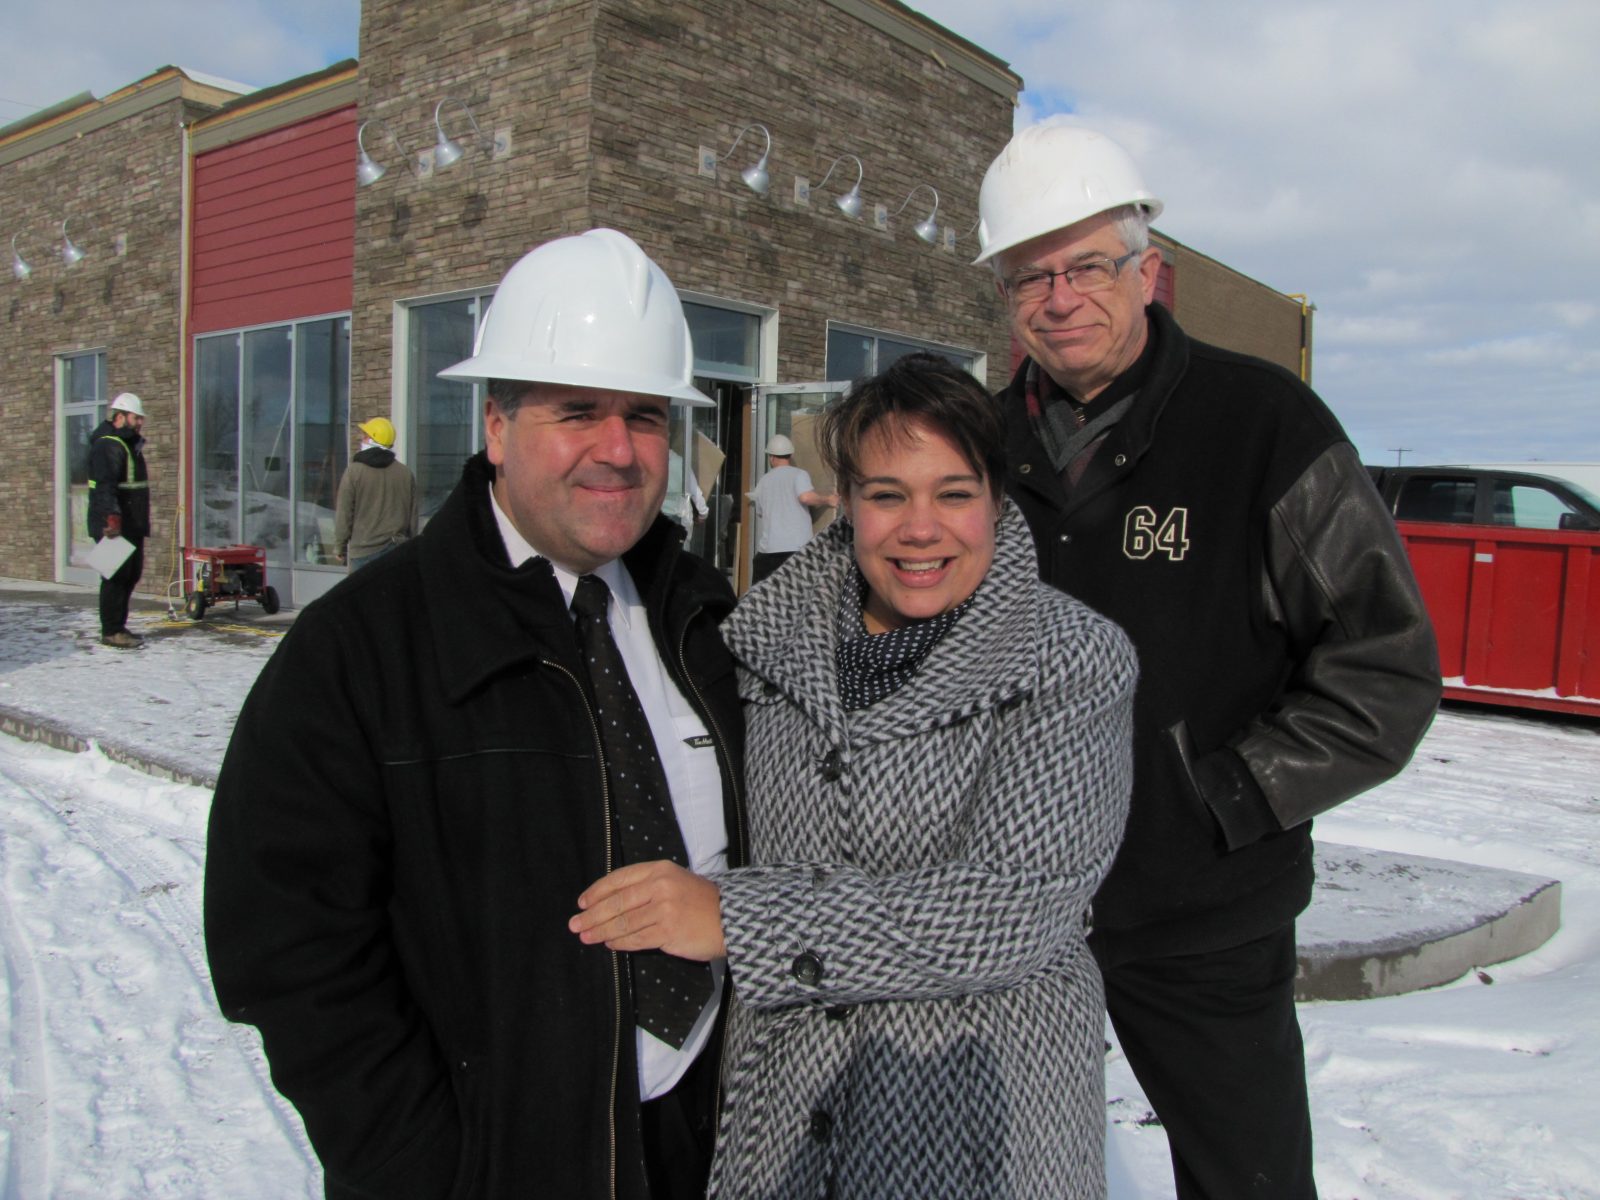 New Boundary Road development quickly taking shape, 10th Timmies added